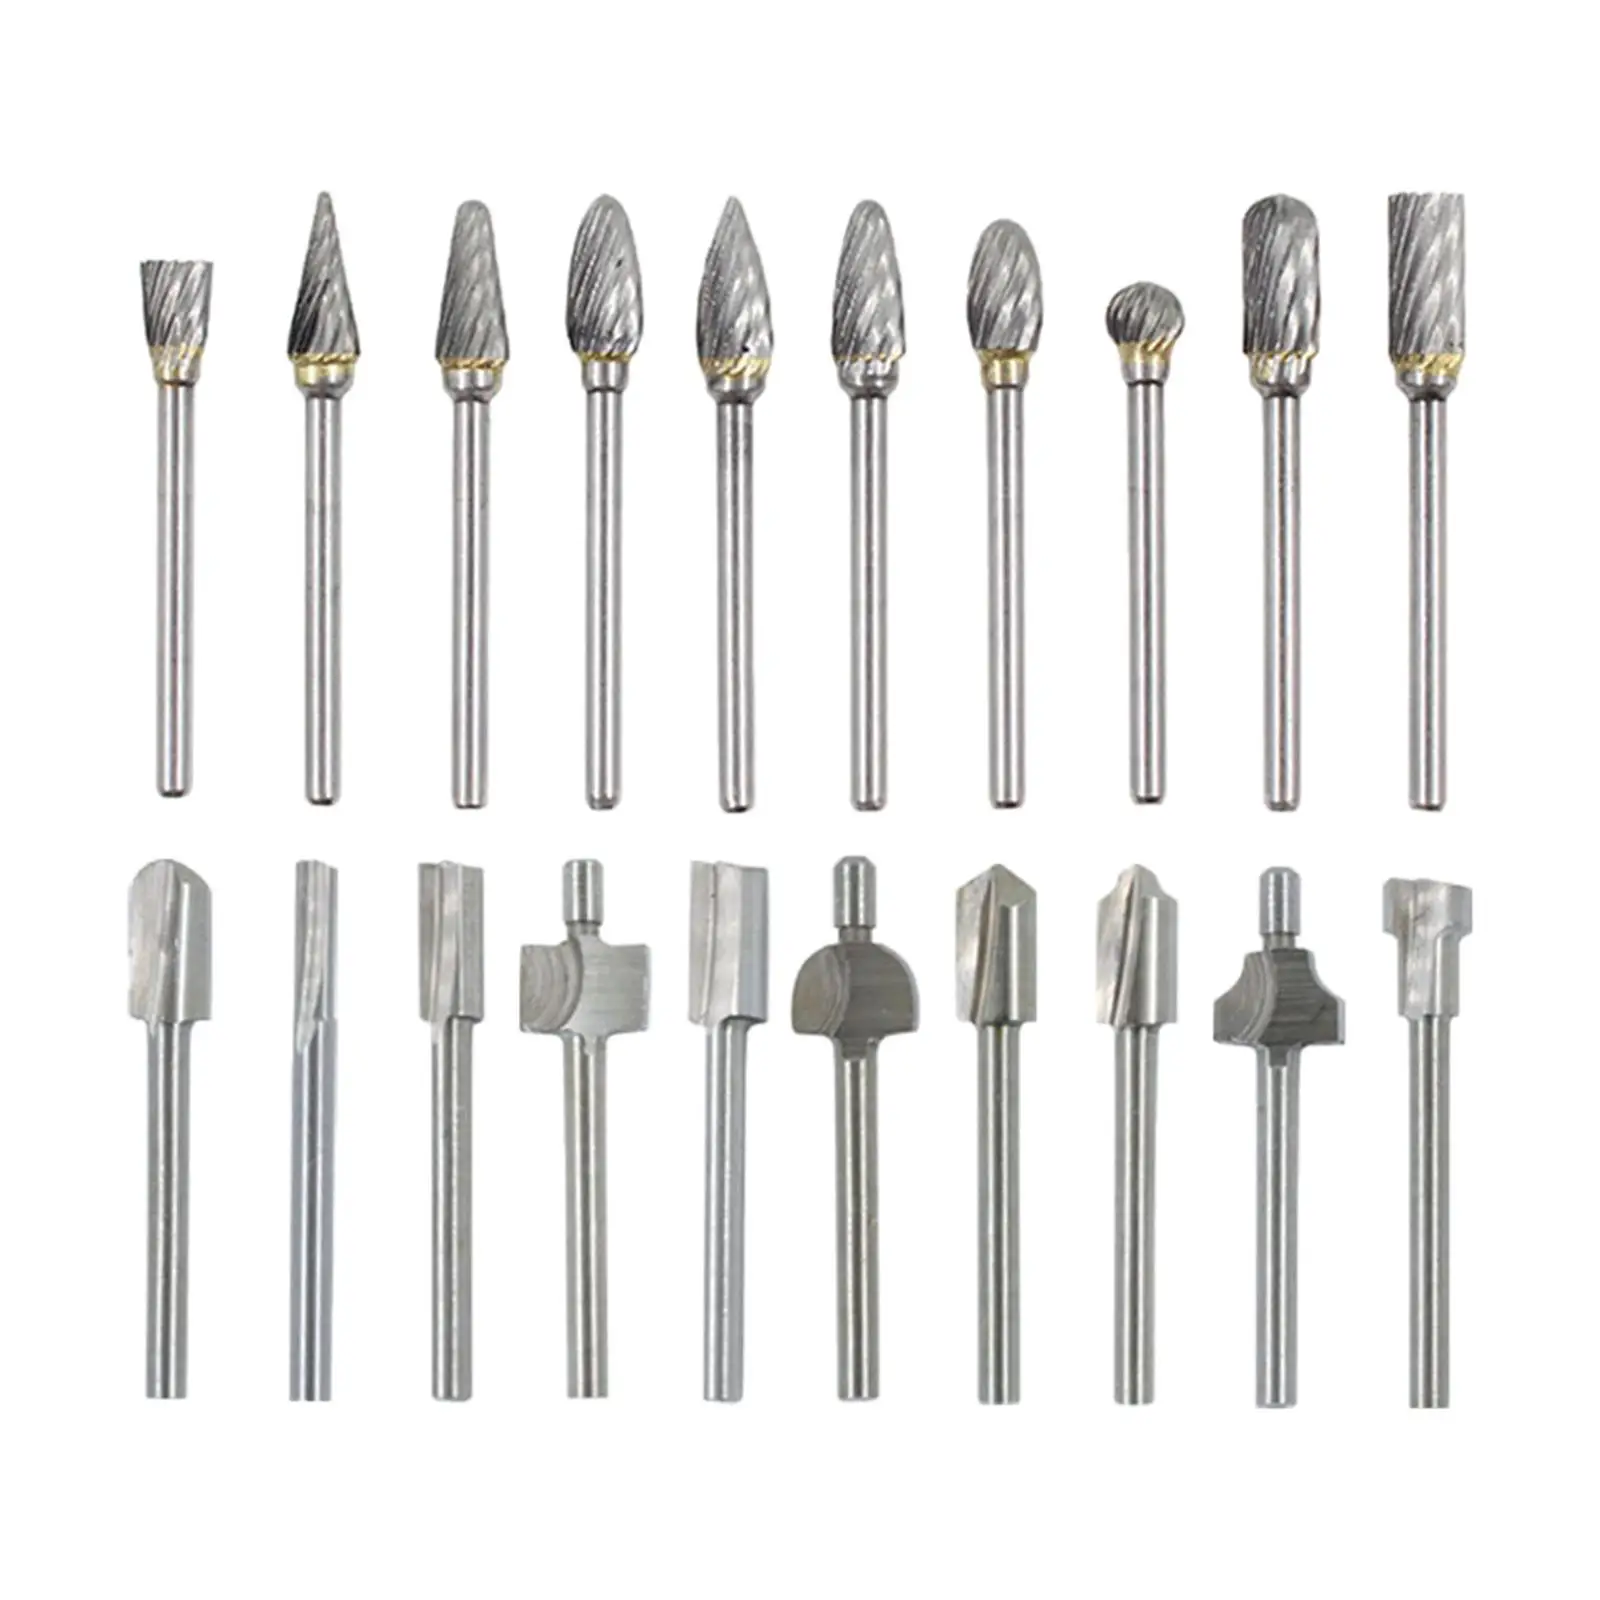 20 Pieces Tungsten Steel Rotary Drill Set, Cutting Burr Bit Polishing Rotary Tools for Drilling Steel and Wood Working Engraving